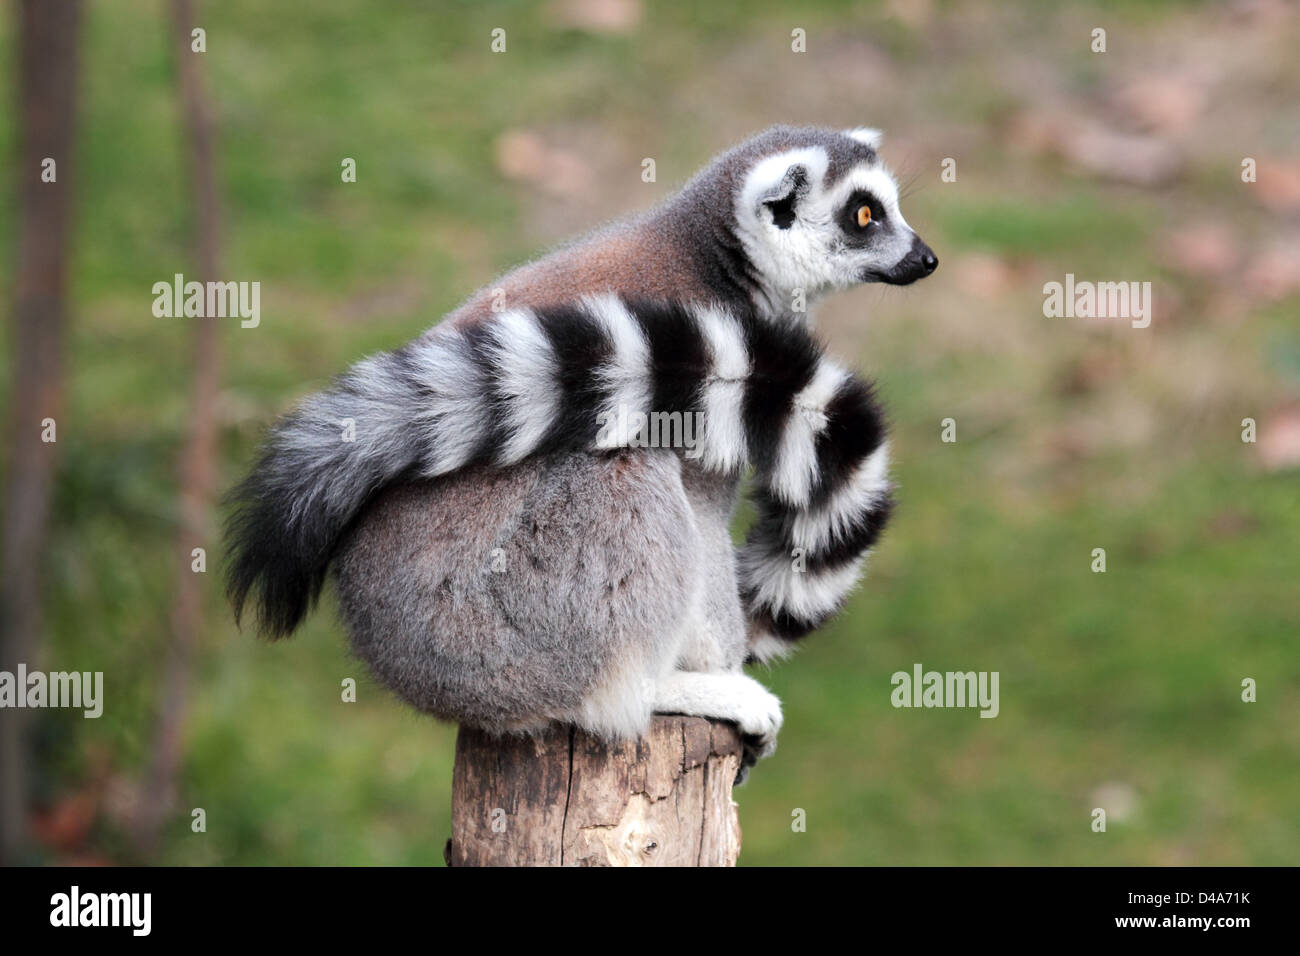 A ring-tailed lemur (Lemur catta) with his long tail around the body is sitting on a log and looking ahead Stock Photo